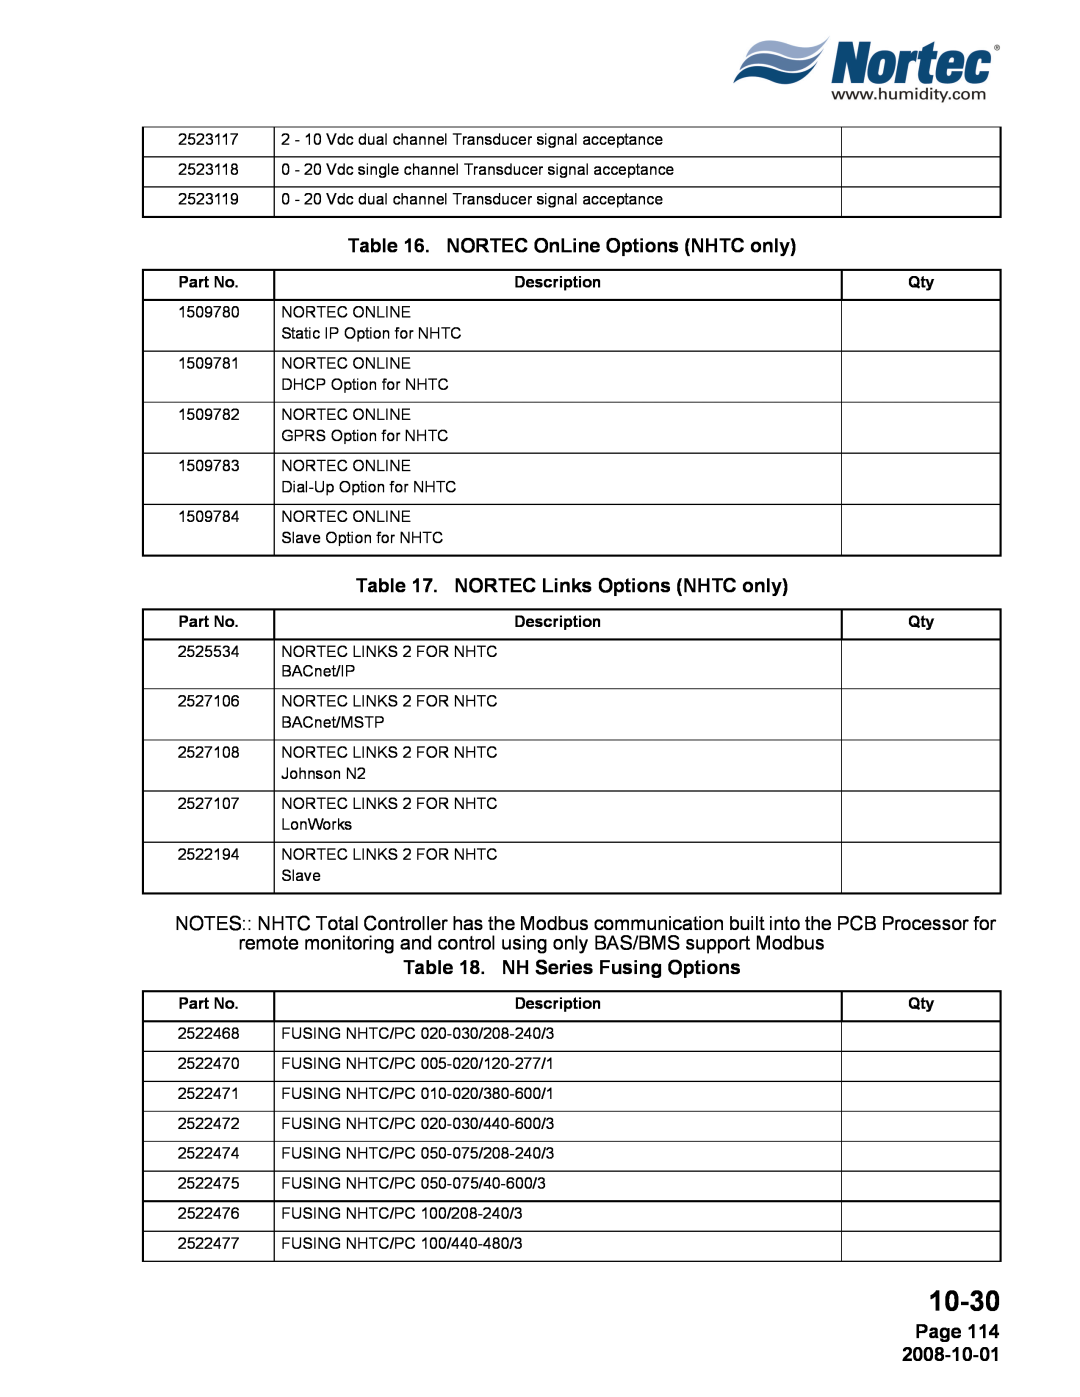 Nortec NHPC 10-30, NORTEC OnLine Options NHTC only, NORTEC Links Options NHTC only, NH Series Fusing Options, Page 114 